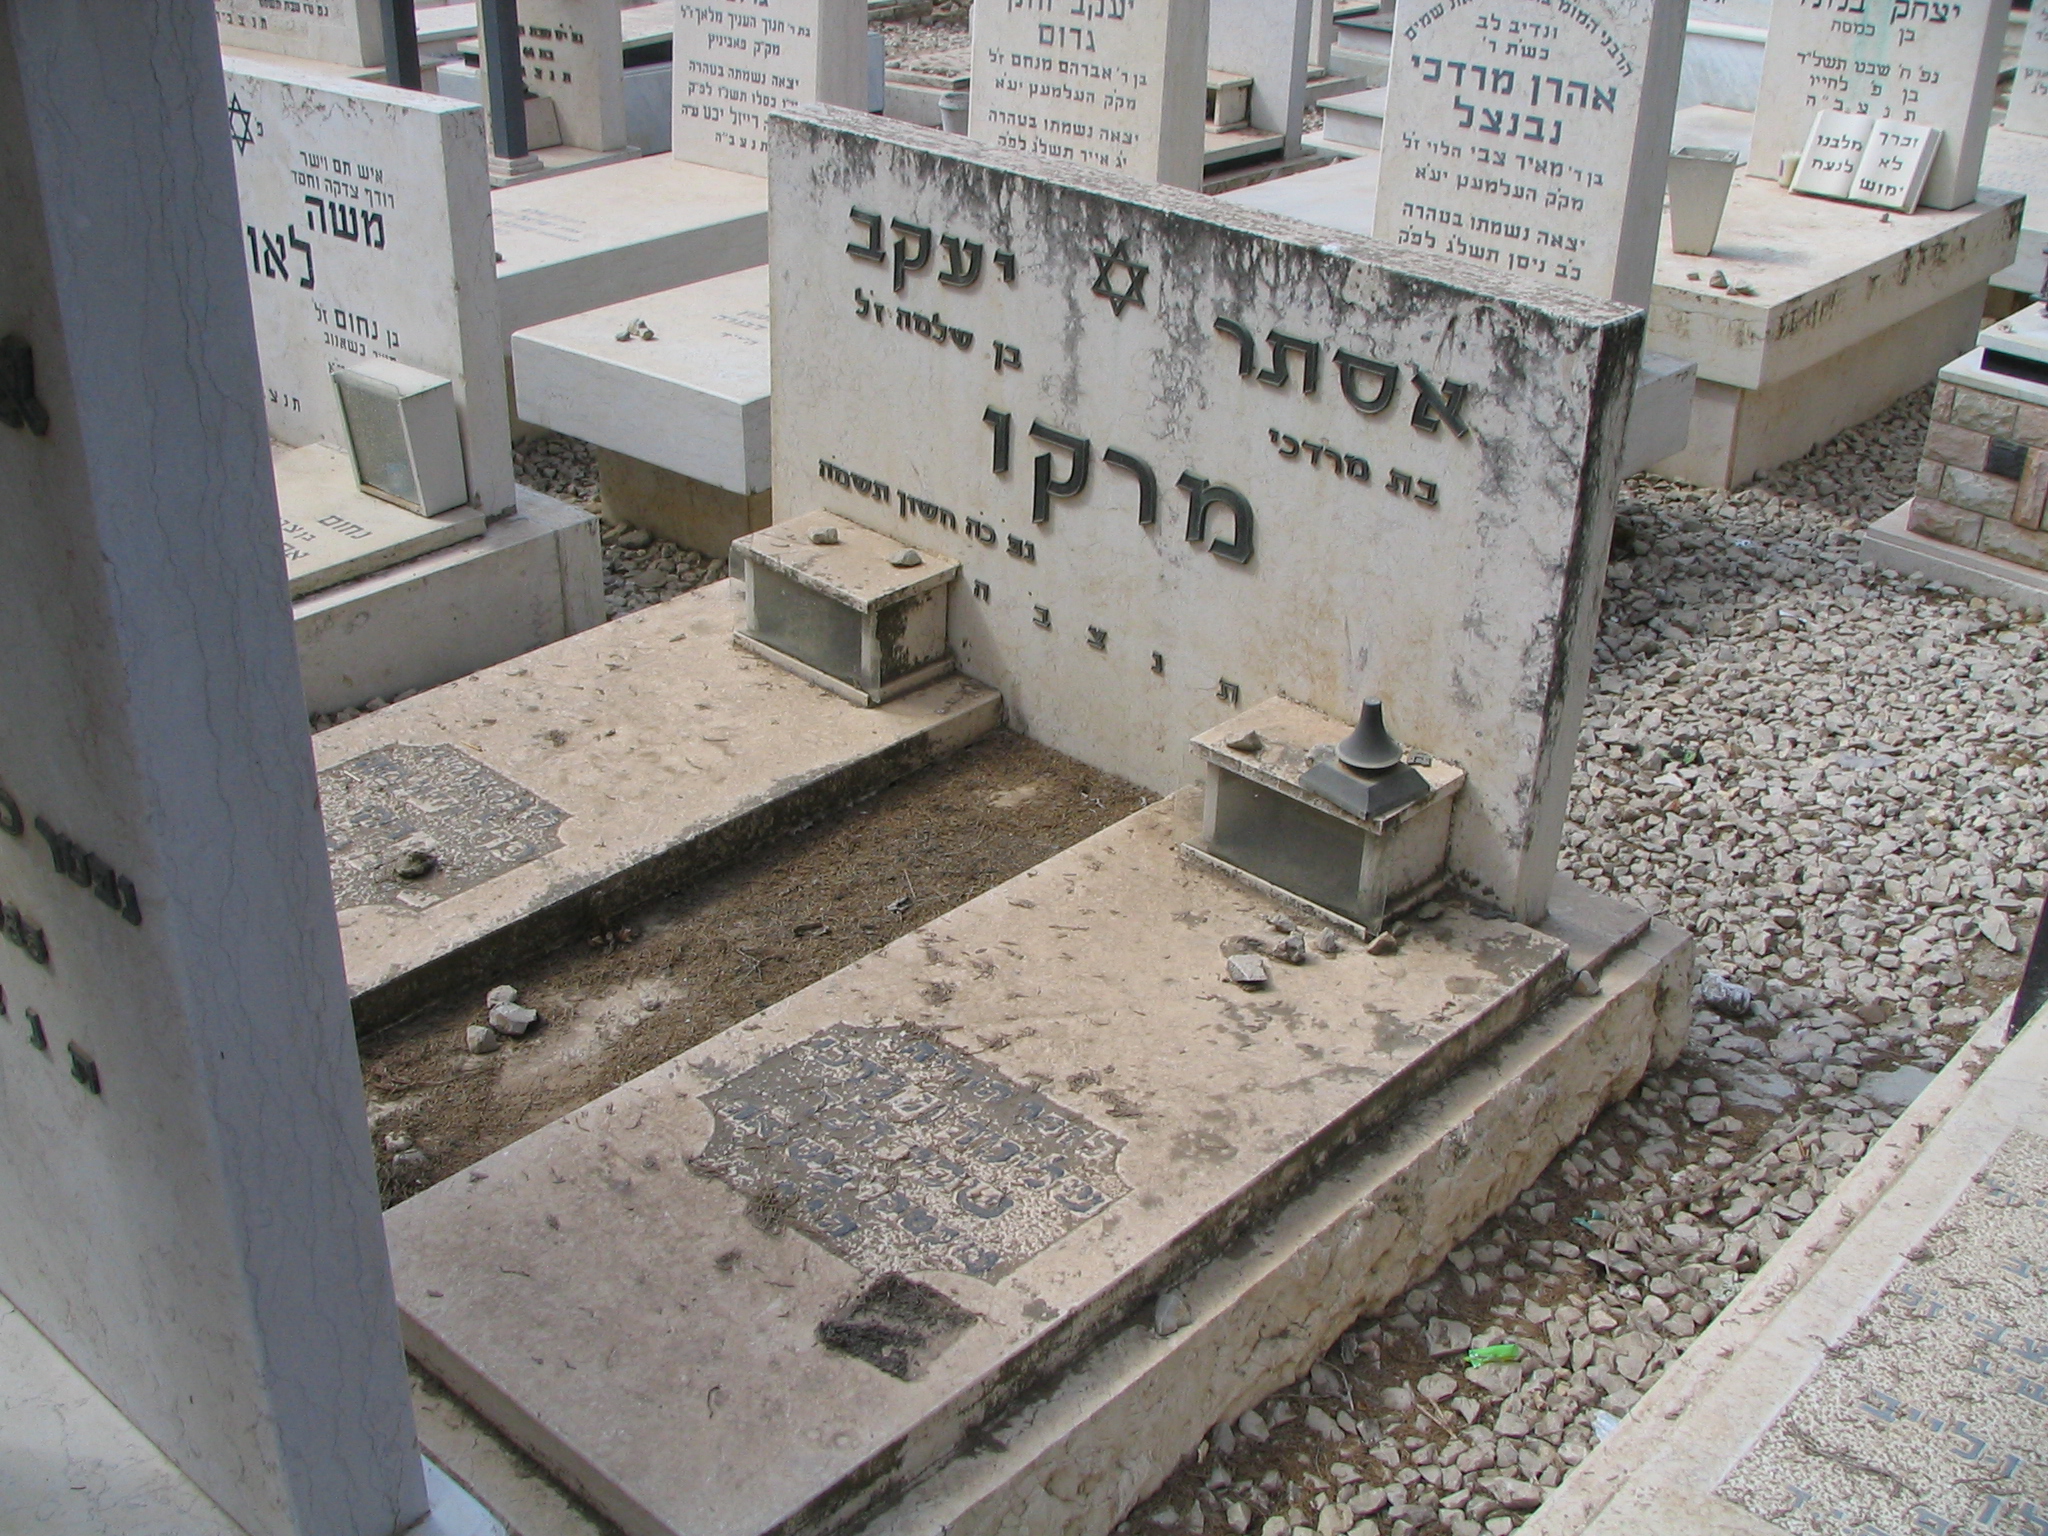 Taken in 2004 at the Jewish Cemetery at IL(Nethanyah) and sourced from TEL(HerşcoviciBruno).